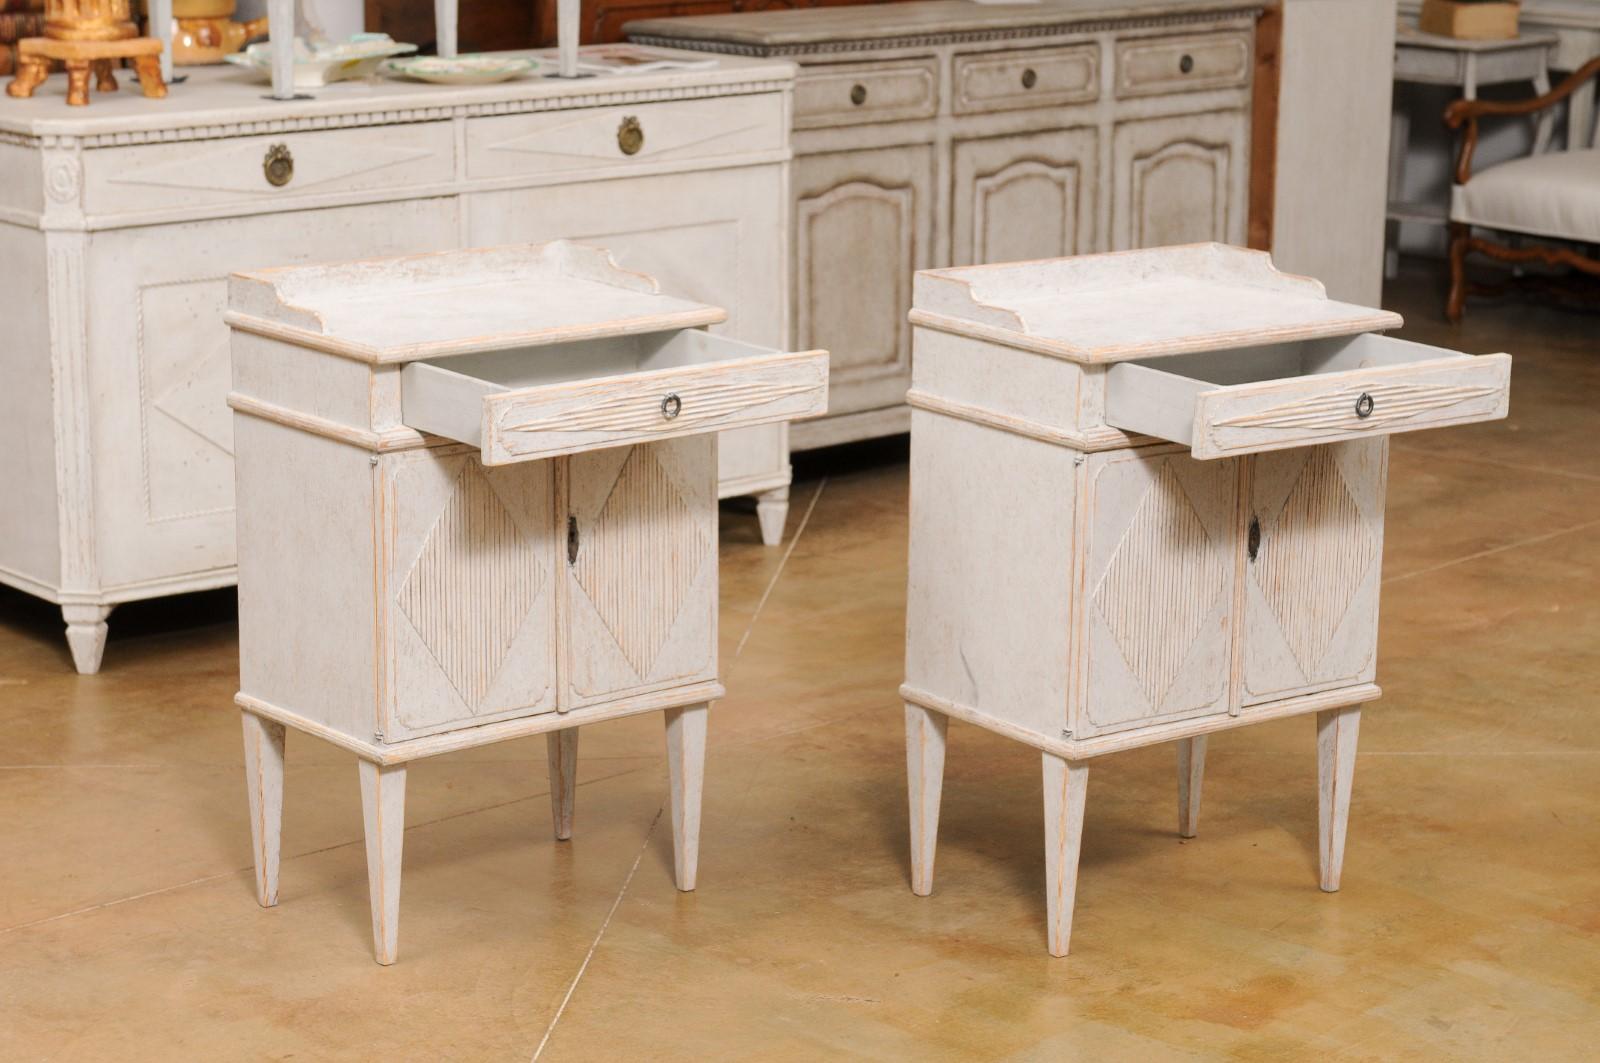 20th Century Pair of Swedish Gustavian Style 1920s Painted Bedside Tables with Diamond Motifs